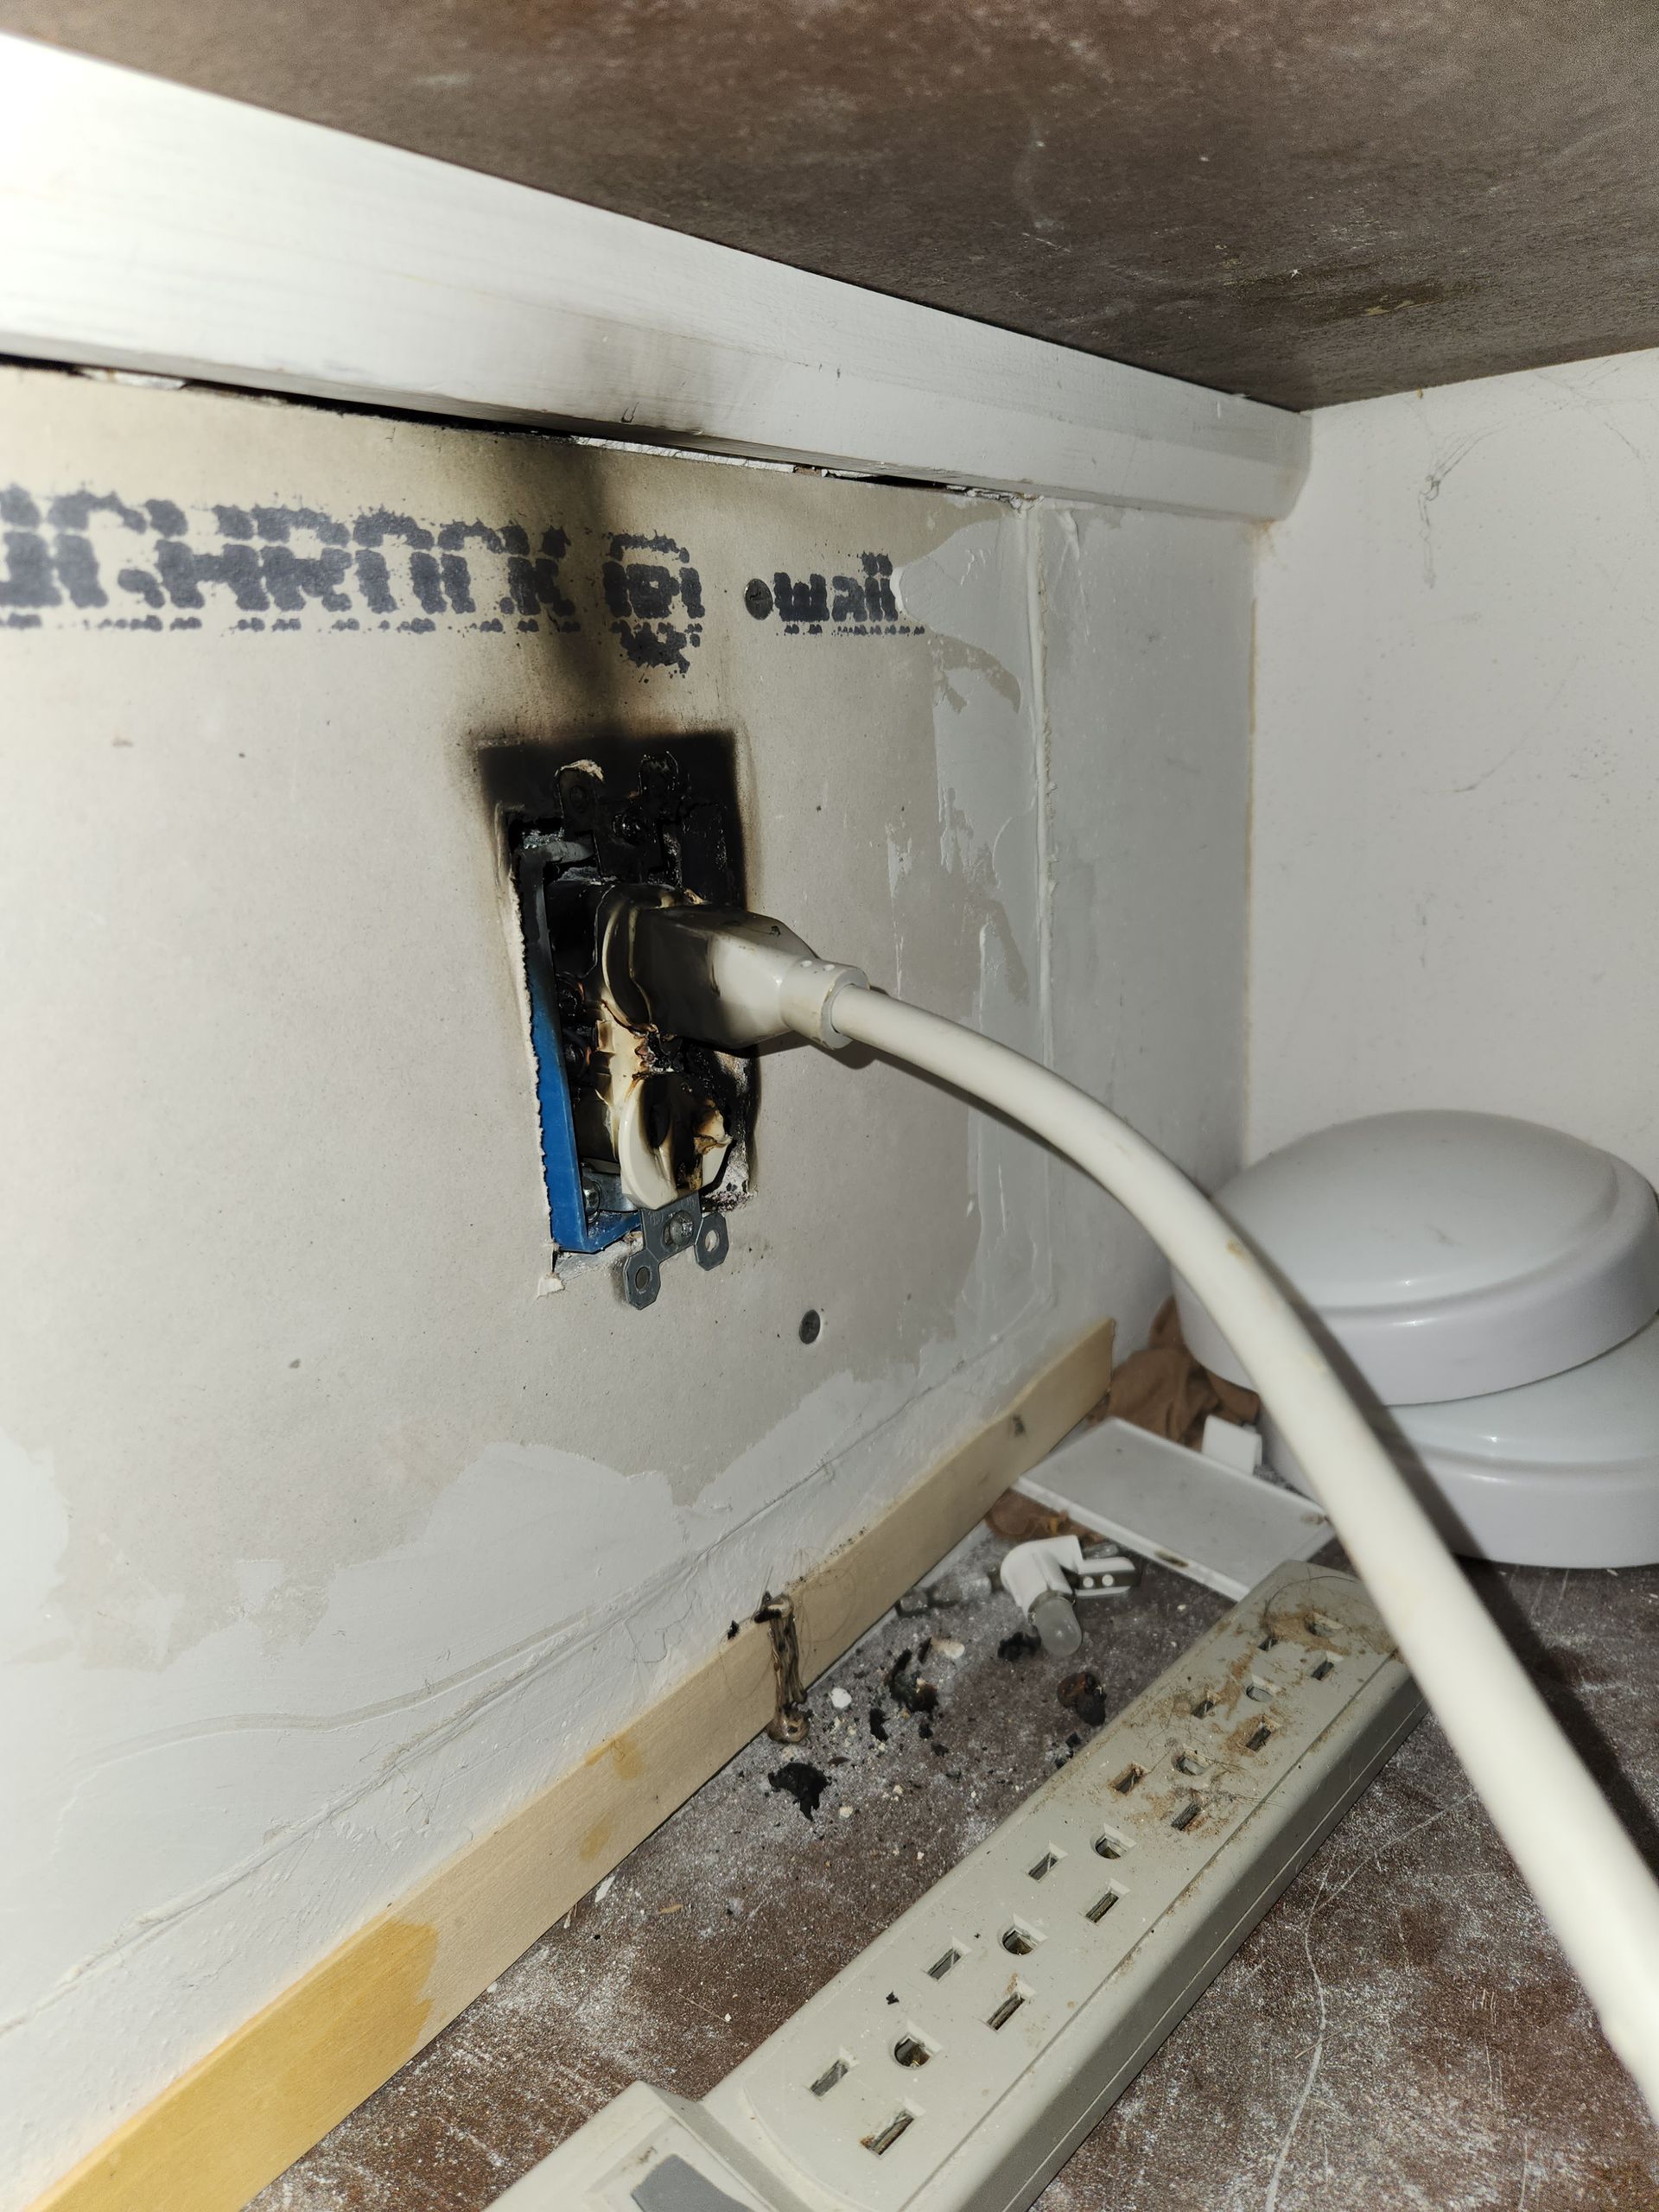 Damaged electric outlet